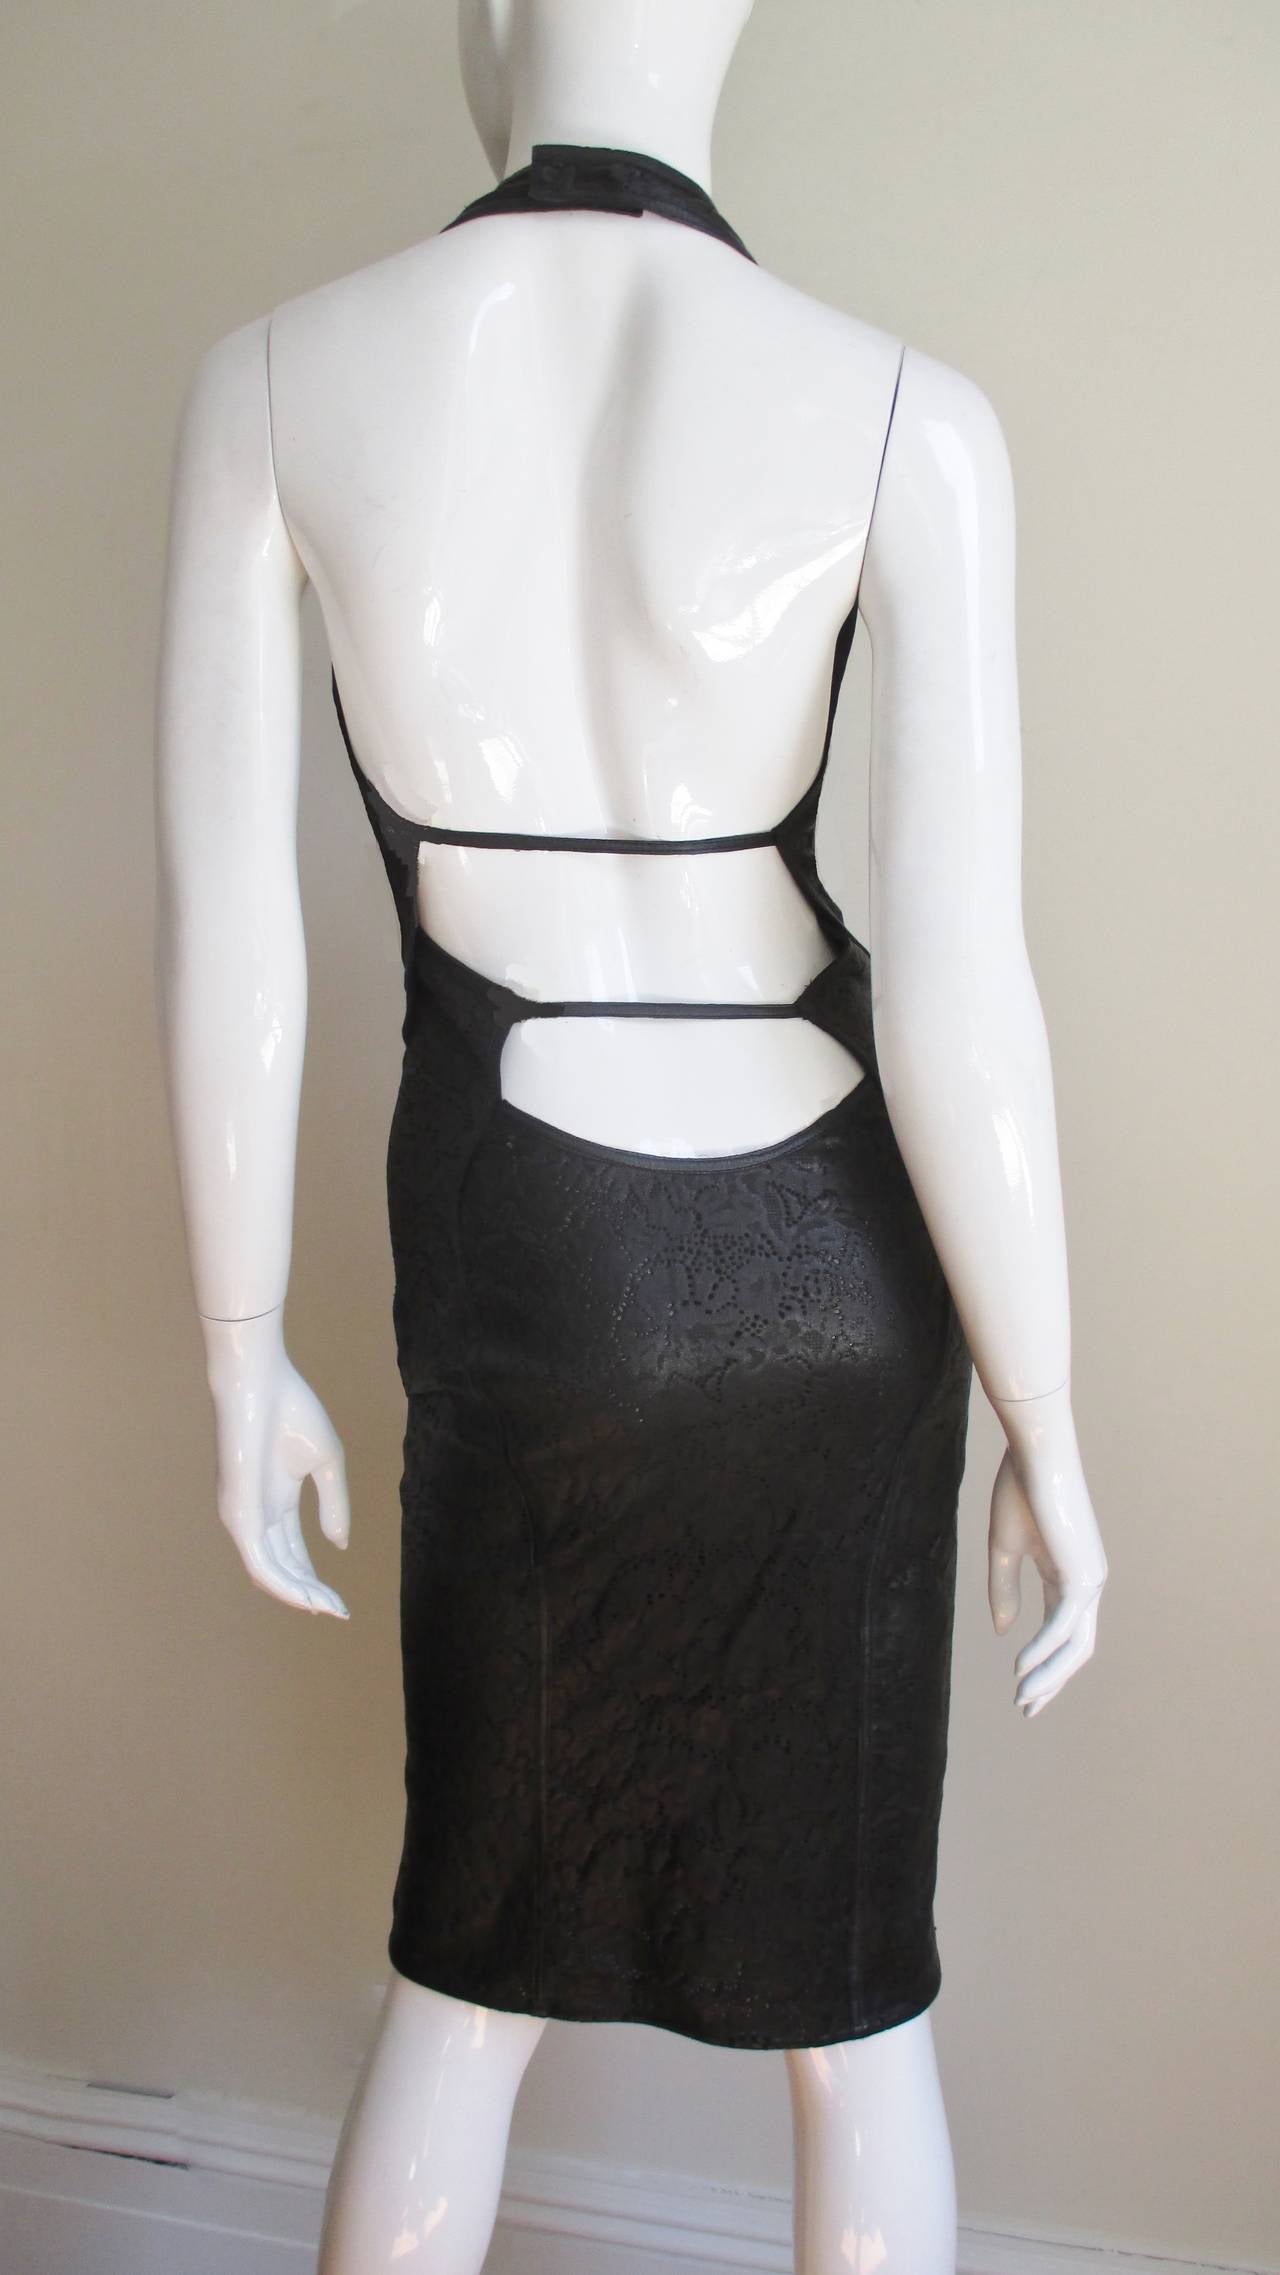 Women's Gianni Versace Laser Perforated Leather Halter Dress 1990s For Sale